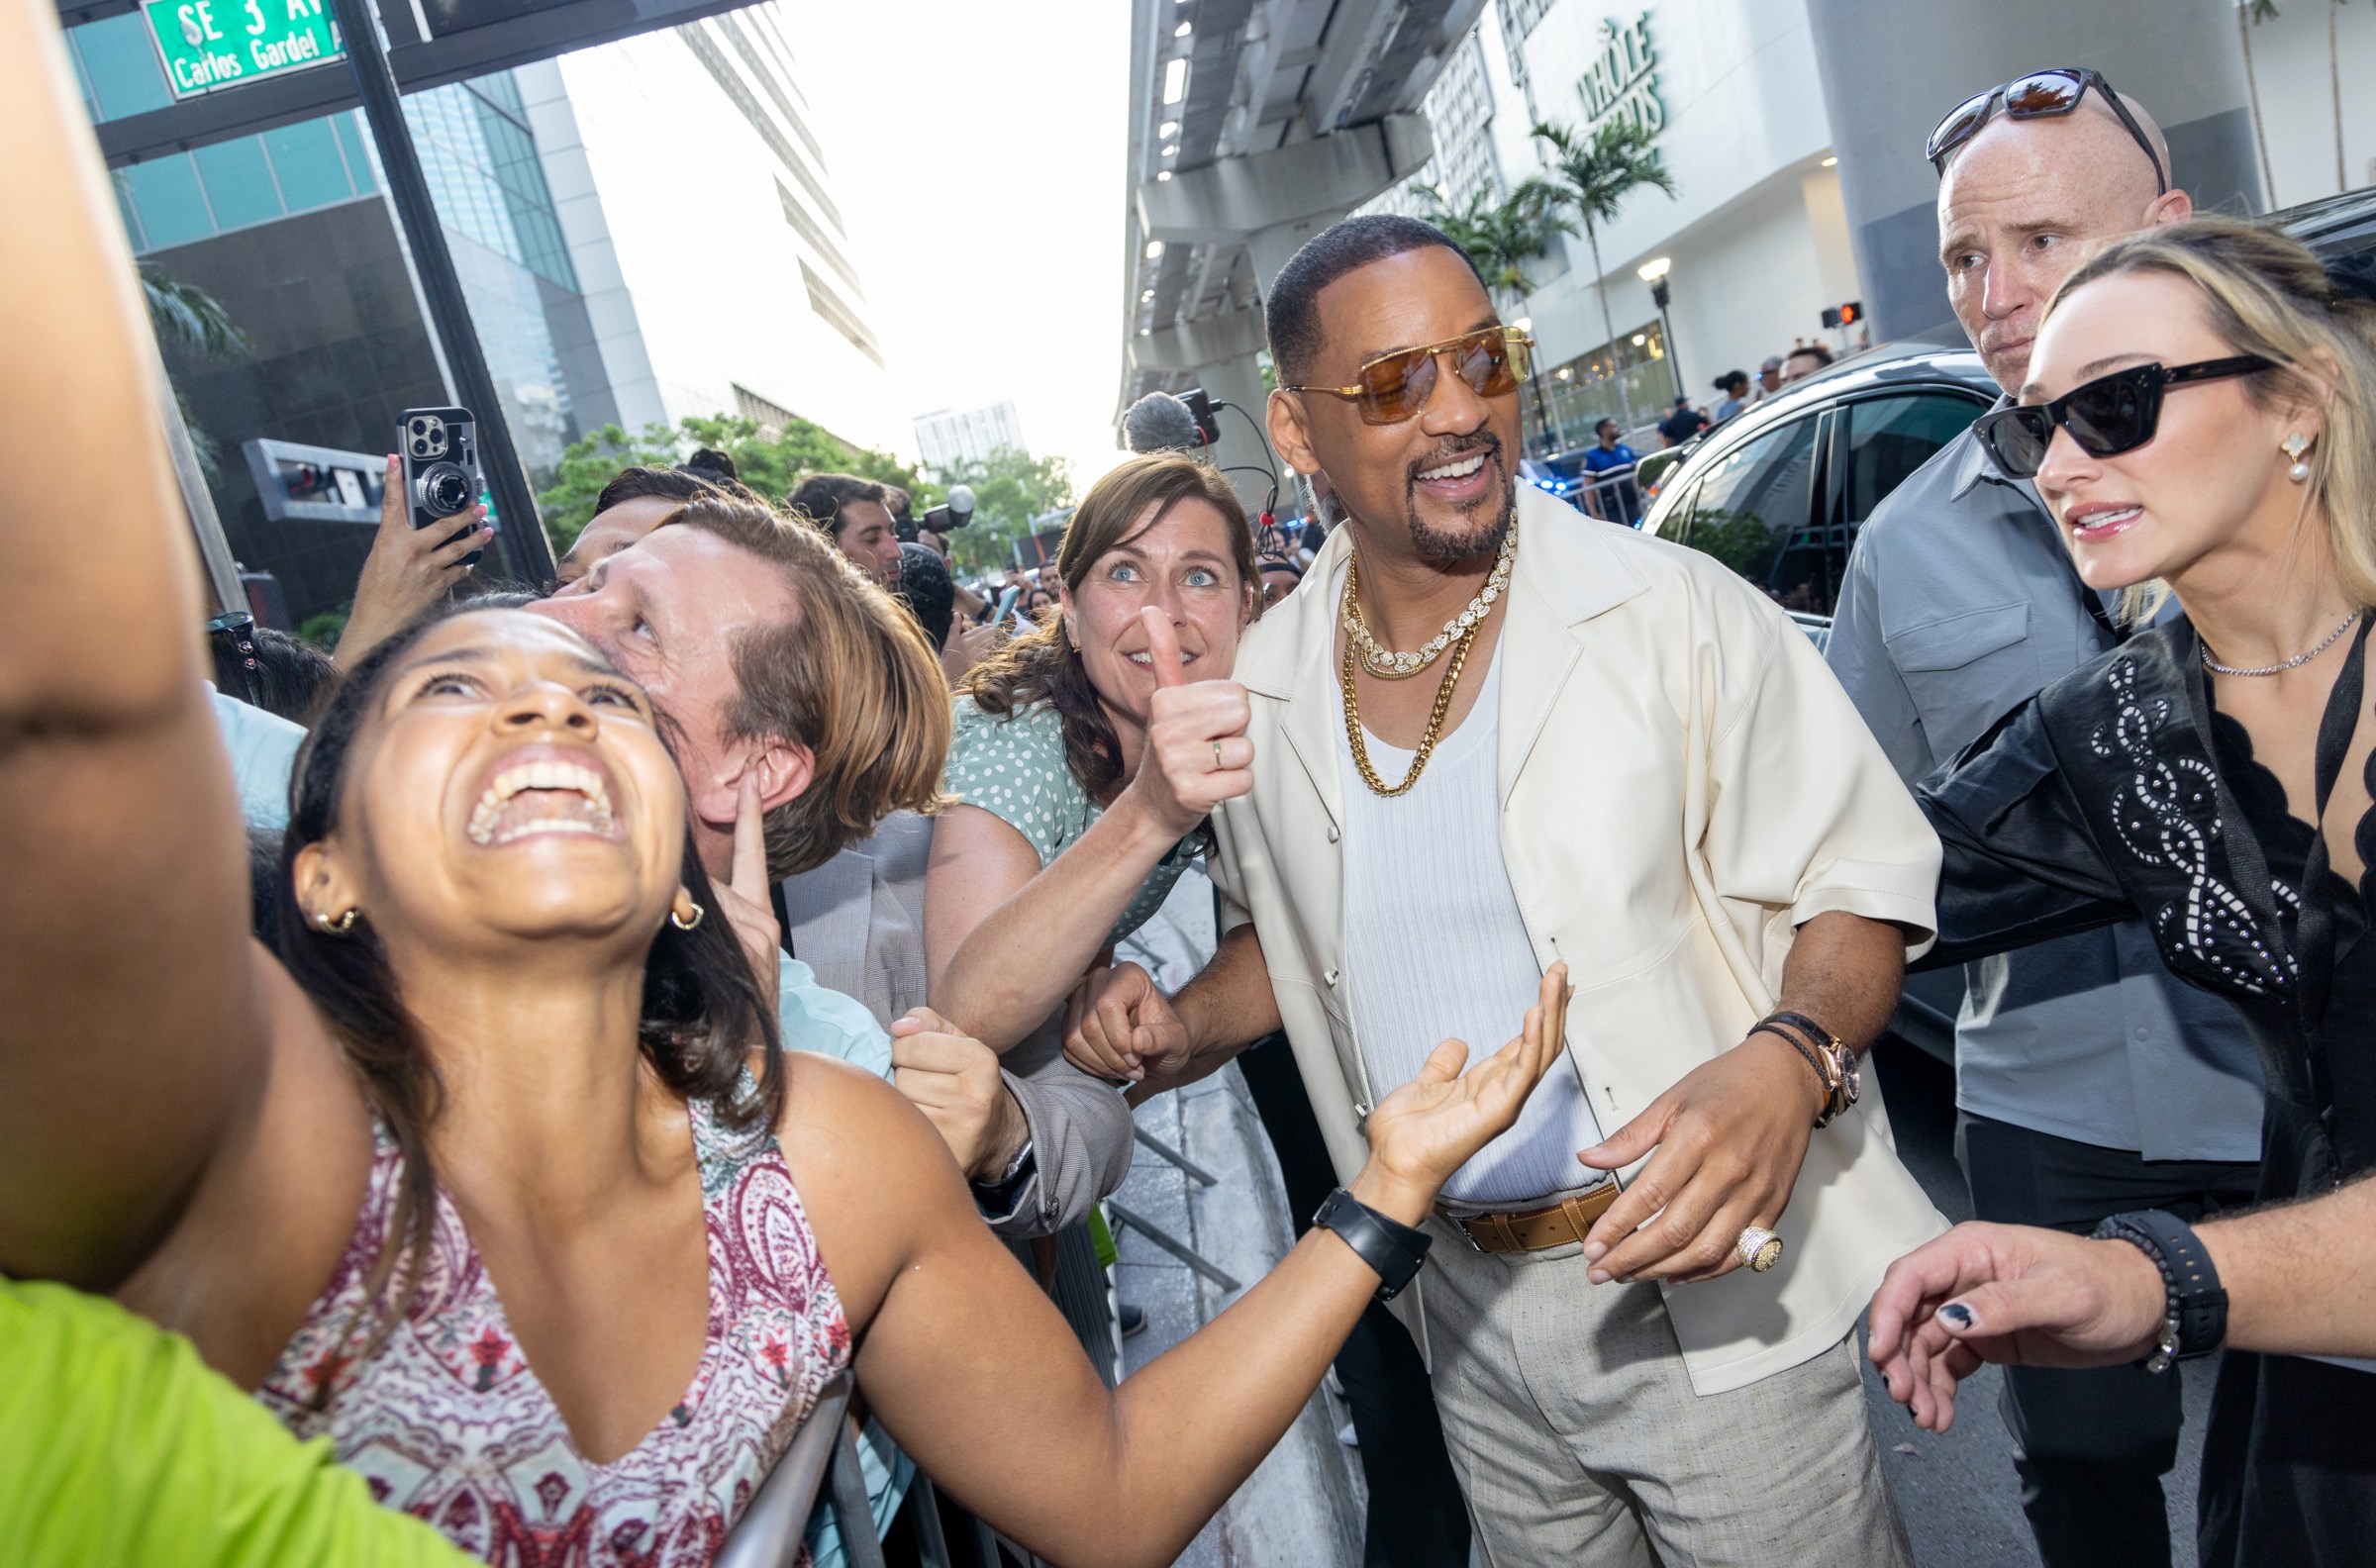 Will Smith walks close by fans, who lean back to take selfies with him.